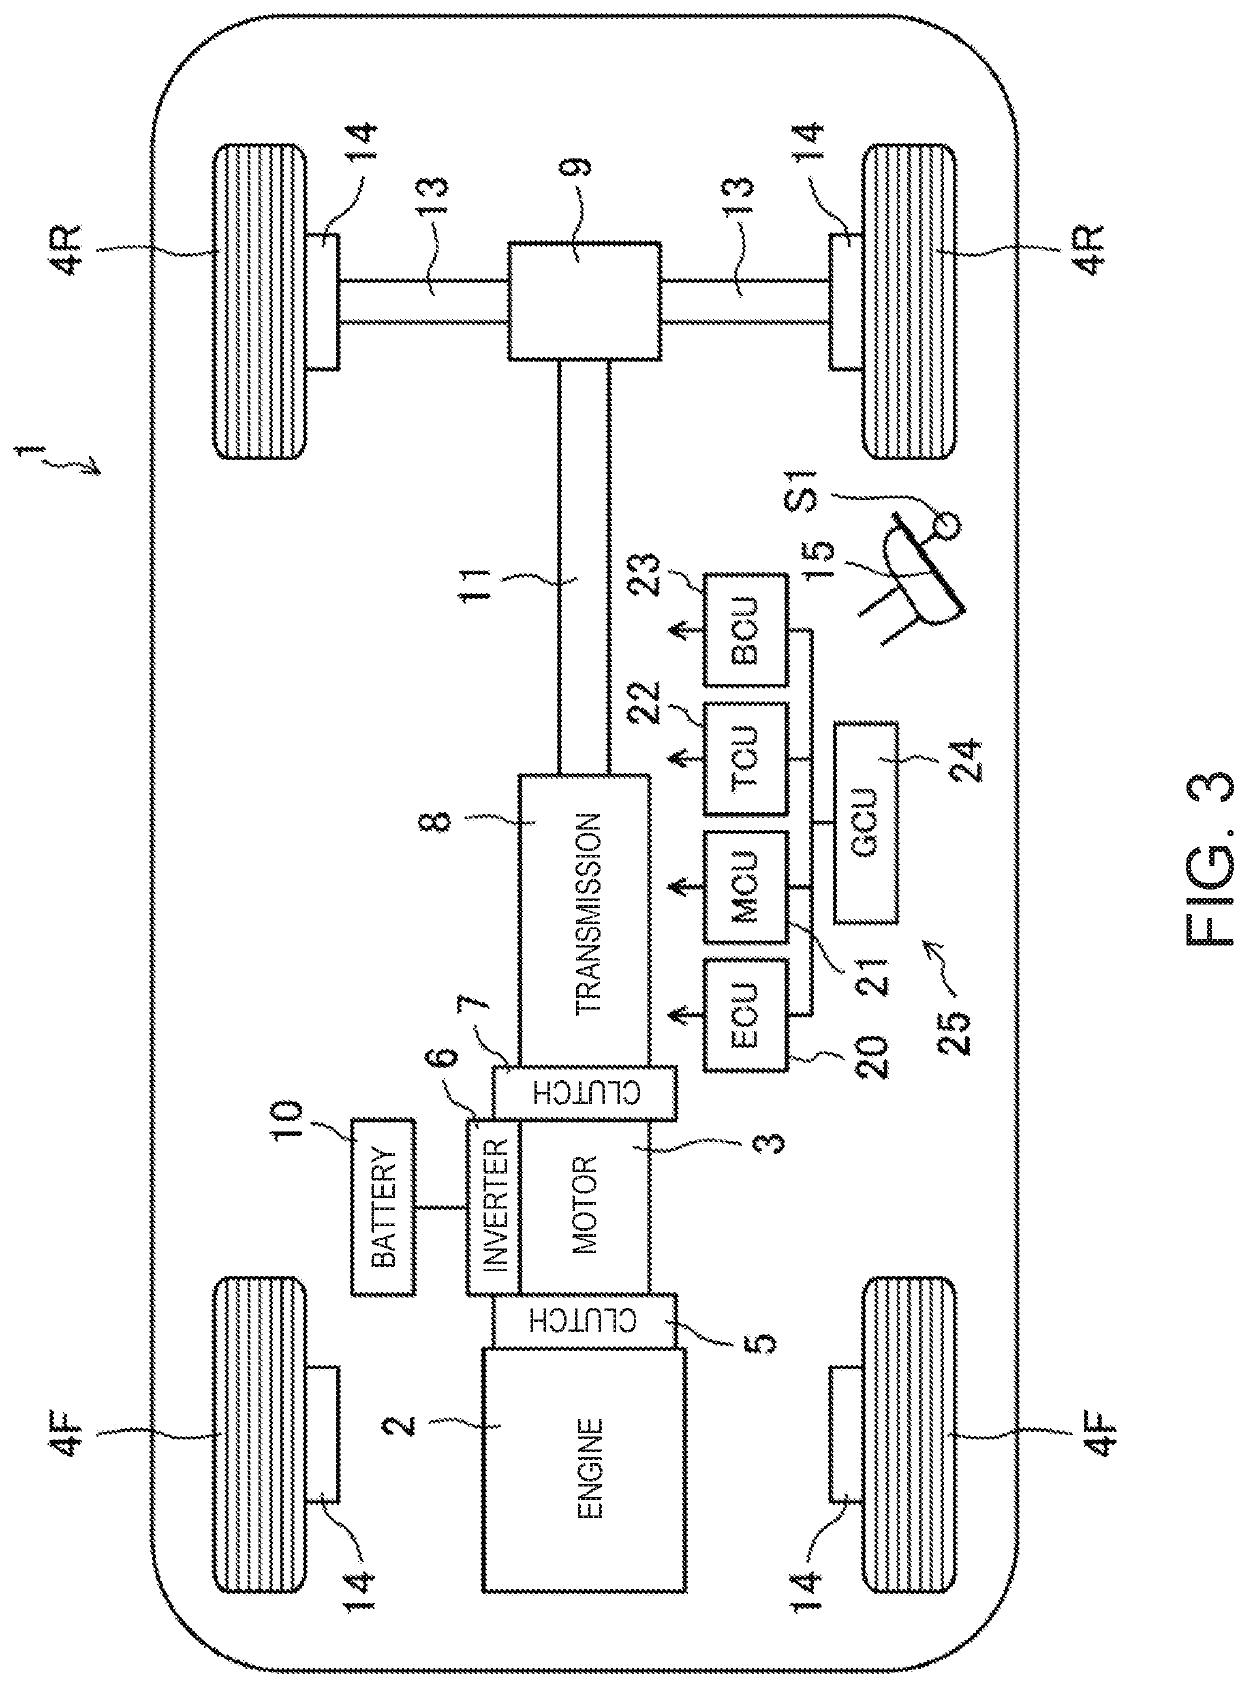 Drive control system for vehicle